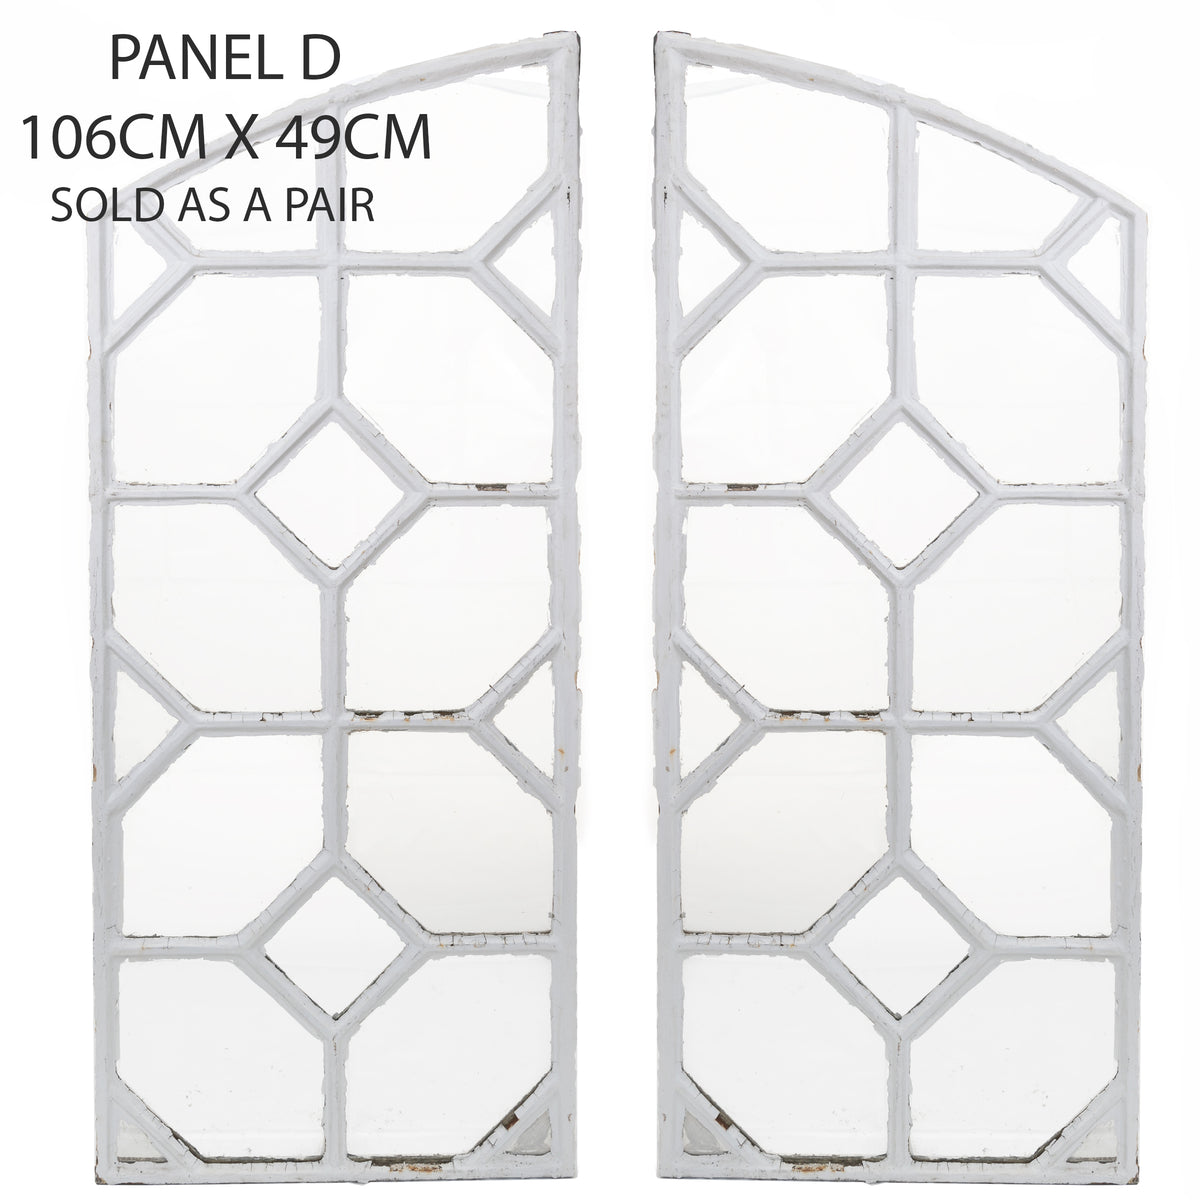 Reclaimed Late 19th Century Crittall Style Honeycomb Window Panels | The Architectural Forum